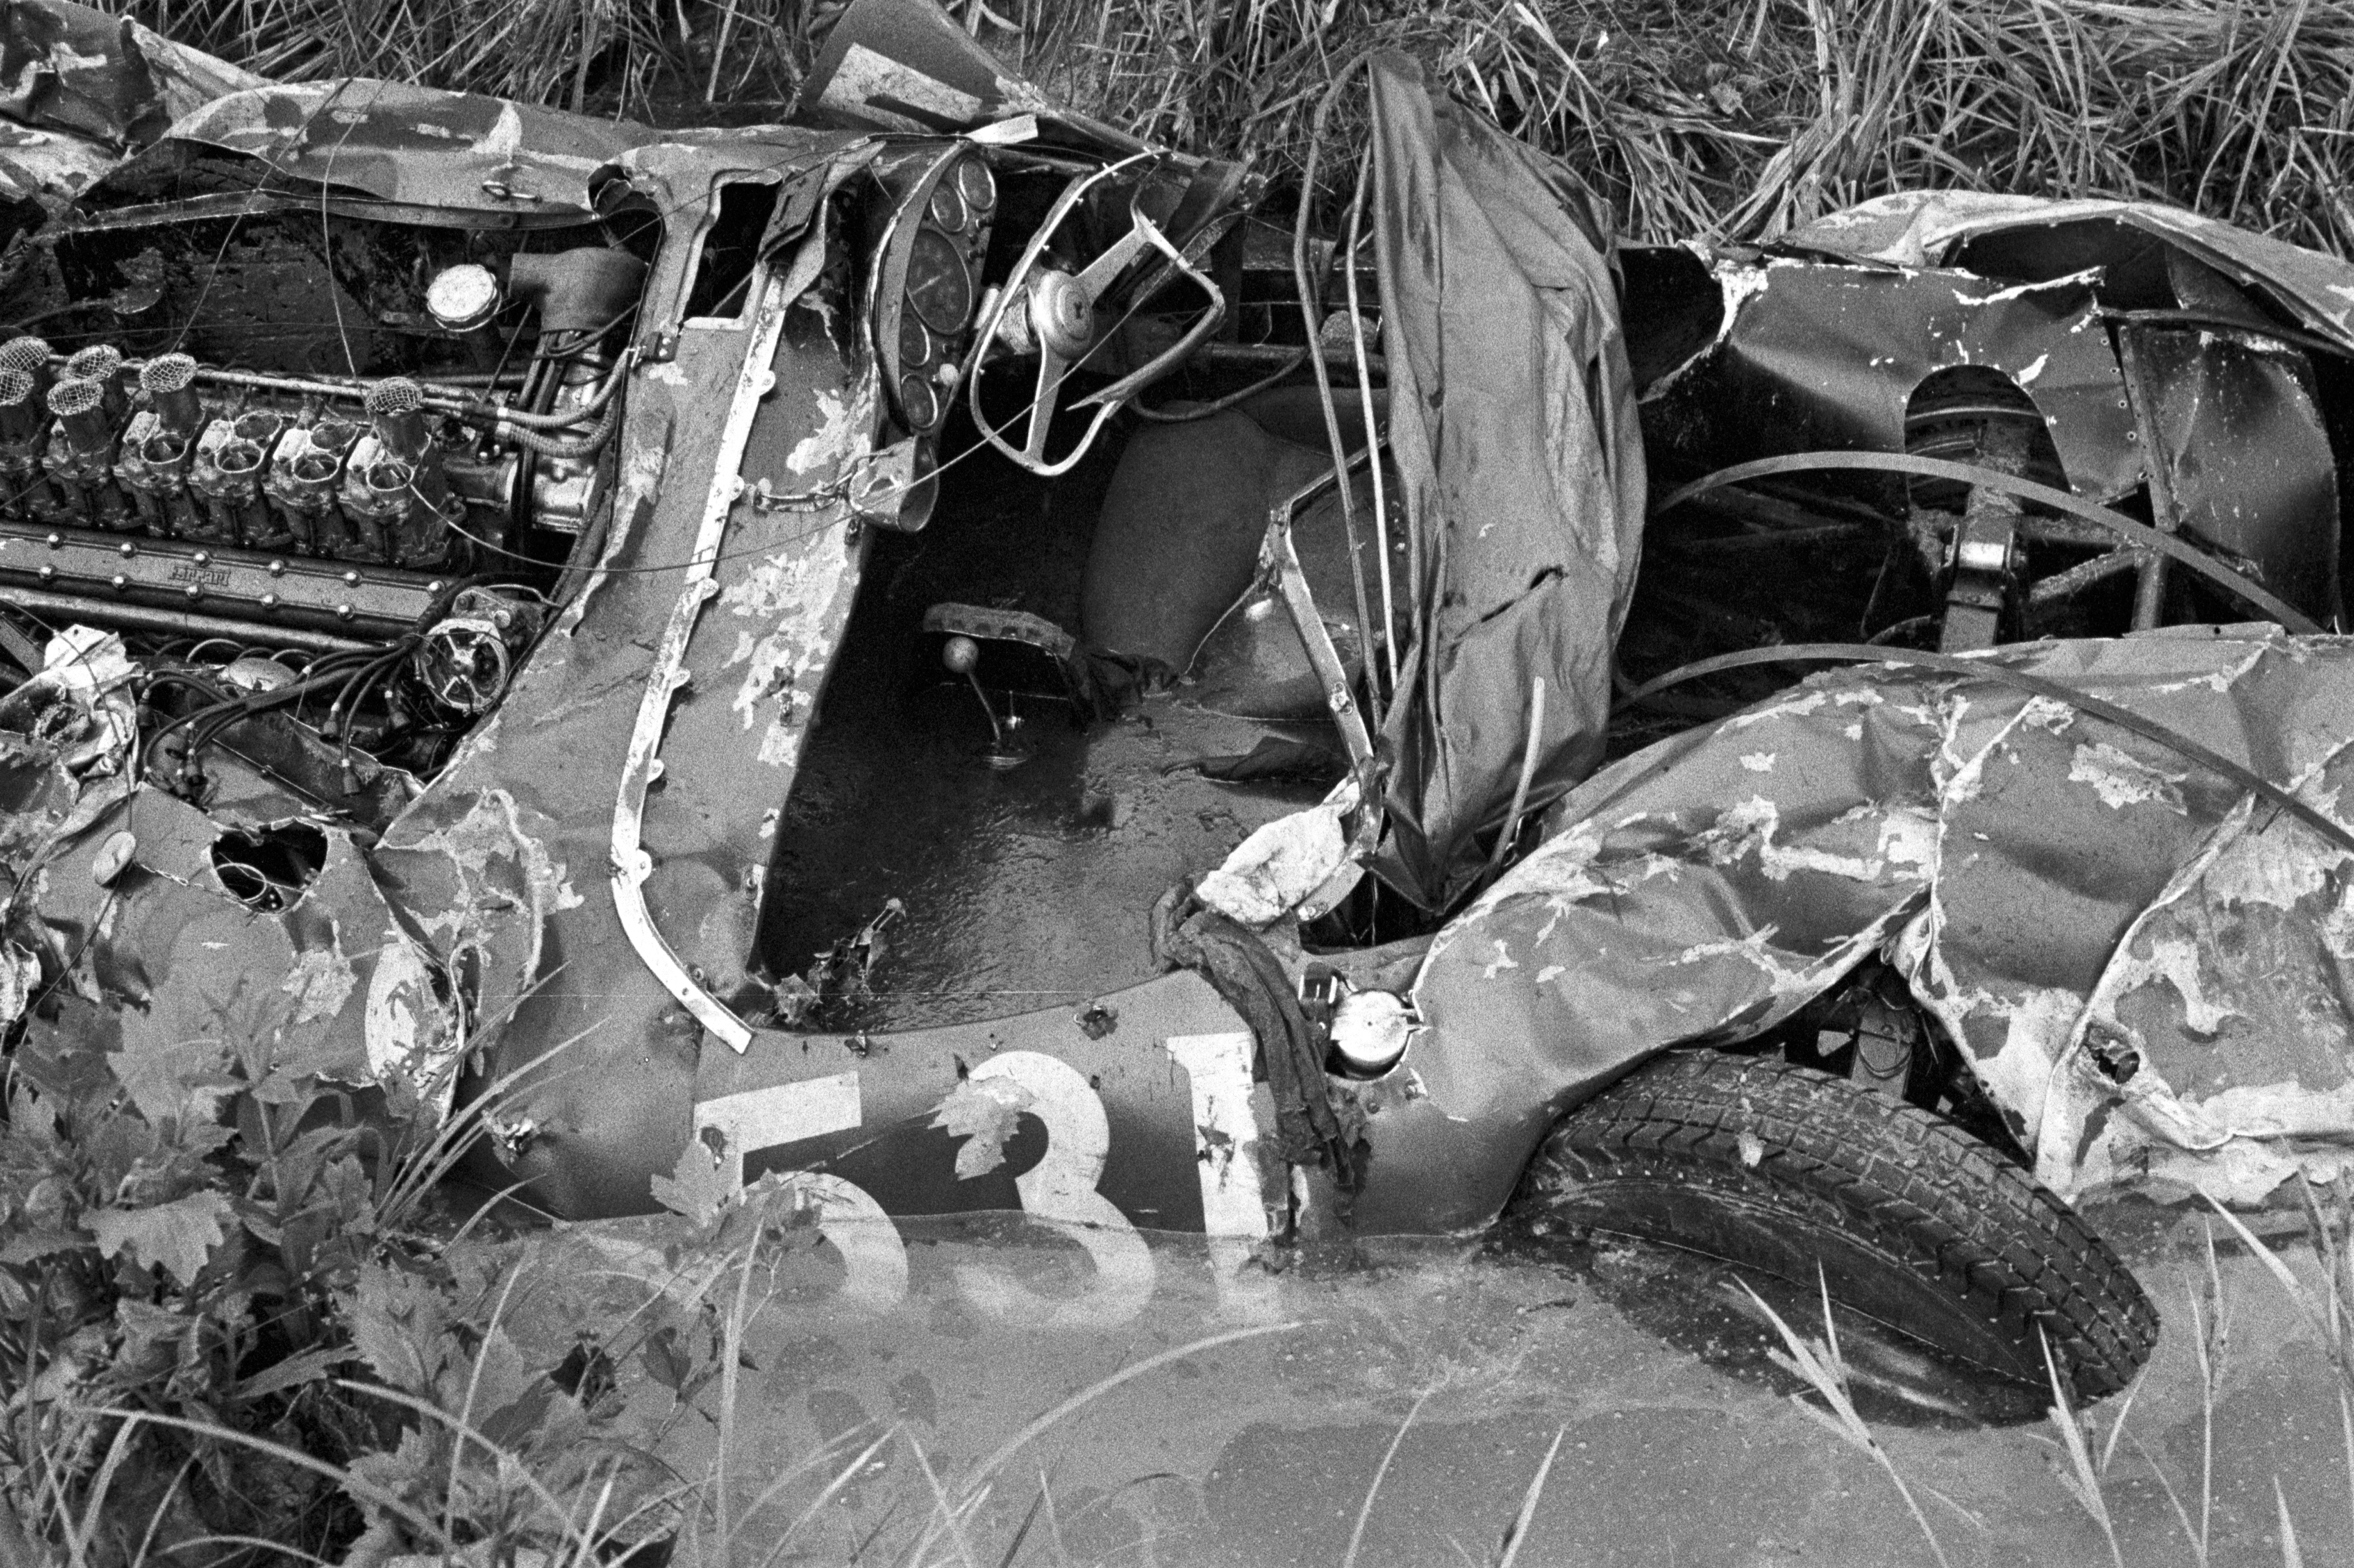 The remains of the mangled Ferrari destroyed during the Mille Miglia Automobile Race